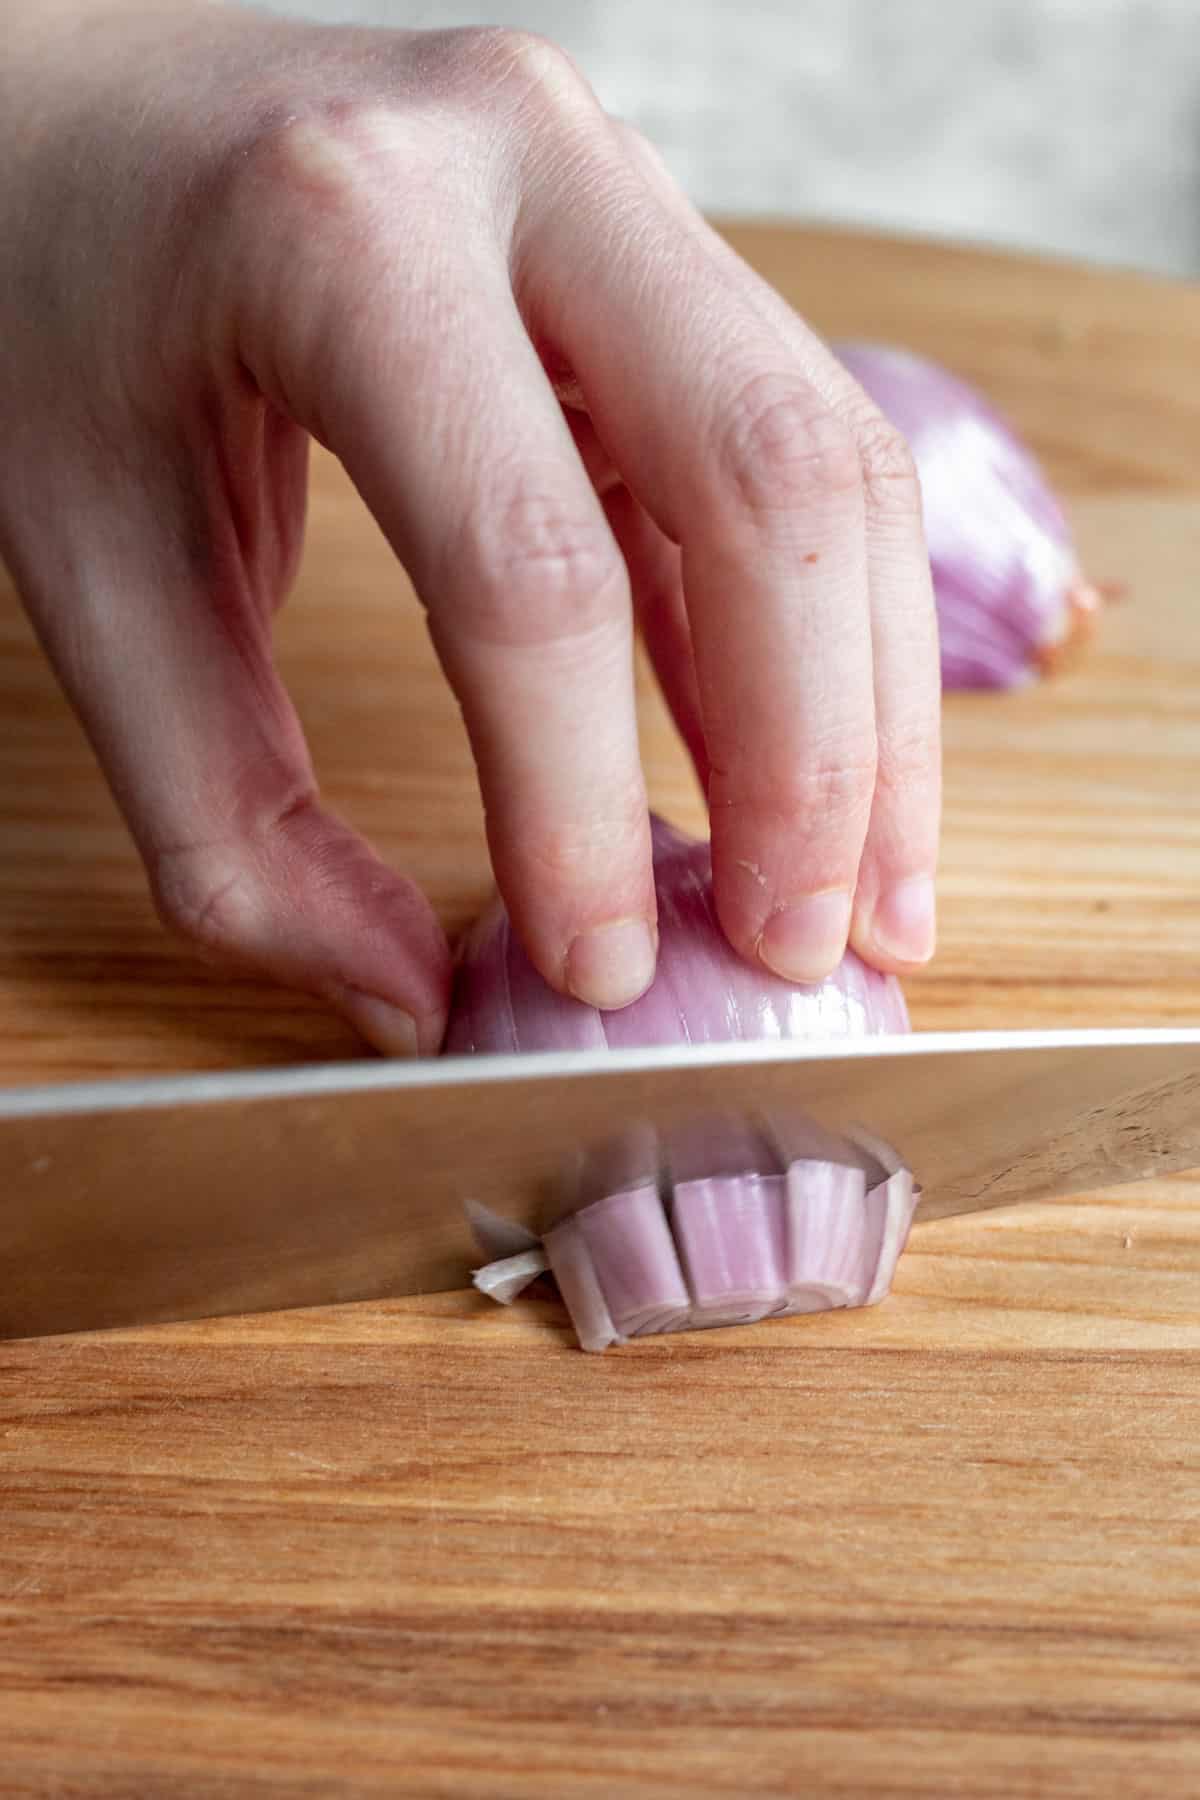 A chef's knife cutting the shallot the opposite way to dice it.